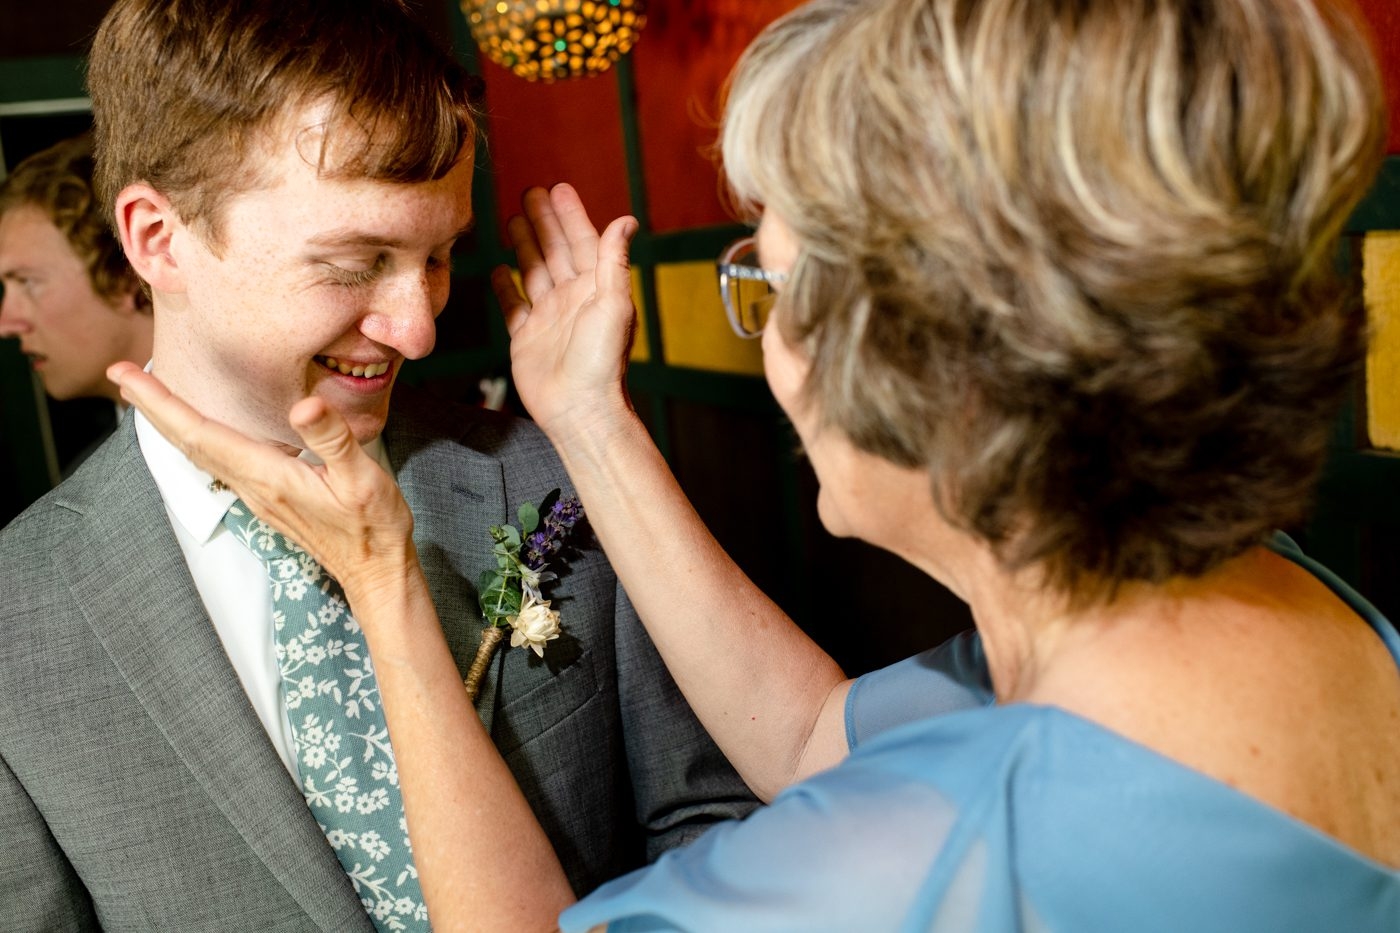 Mother-of-bride-finishes-boutonniere-placement